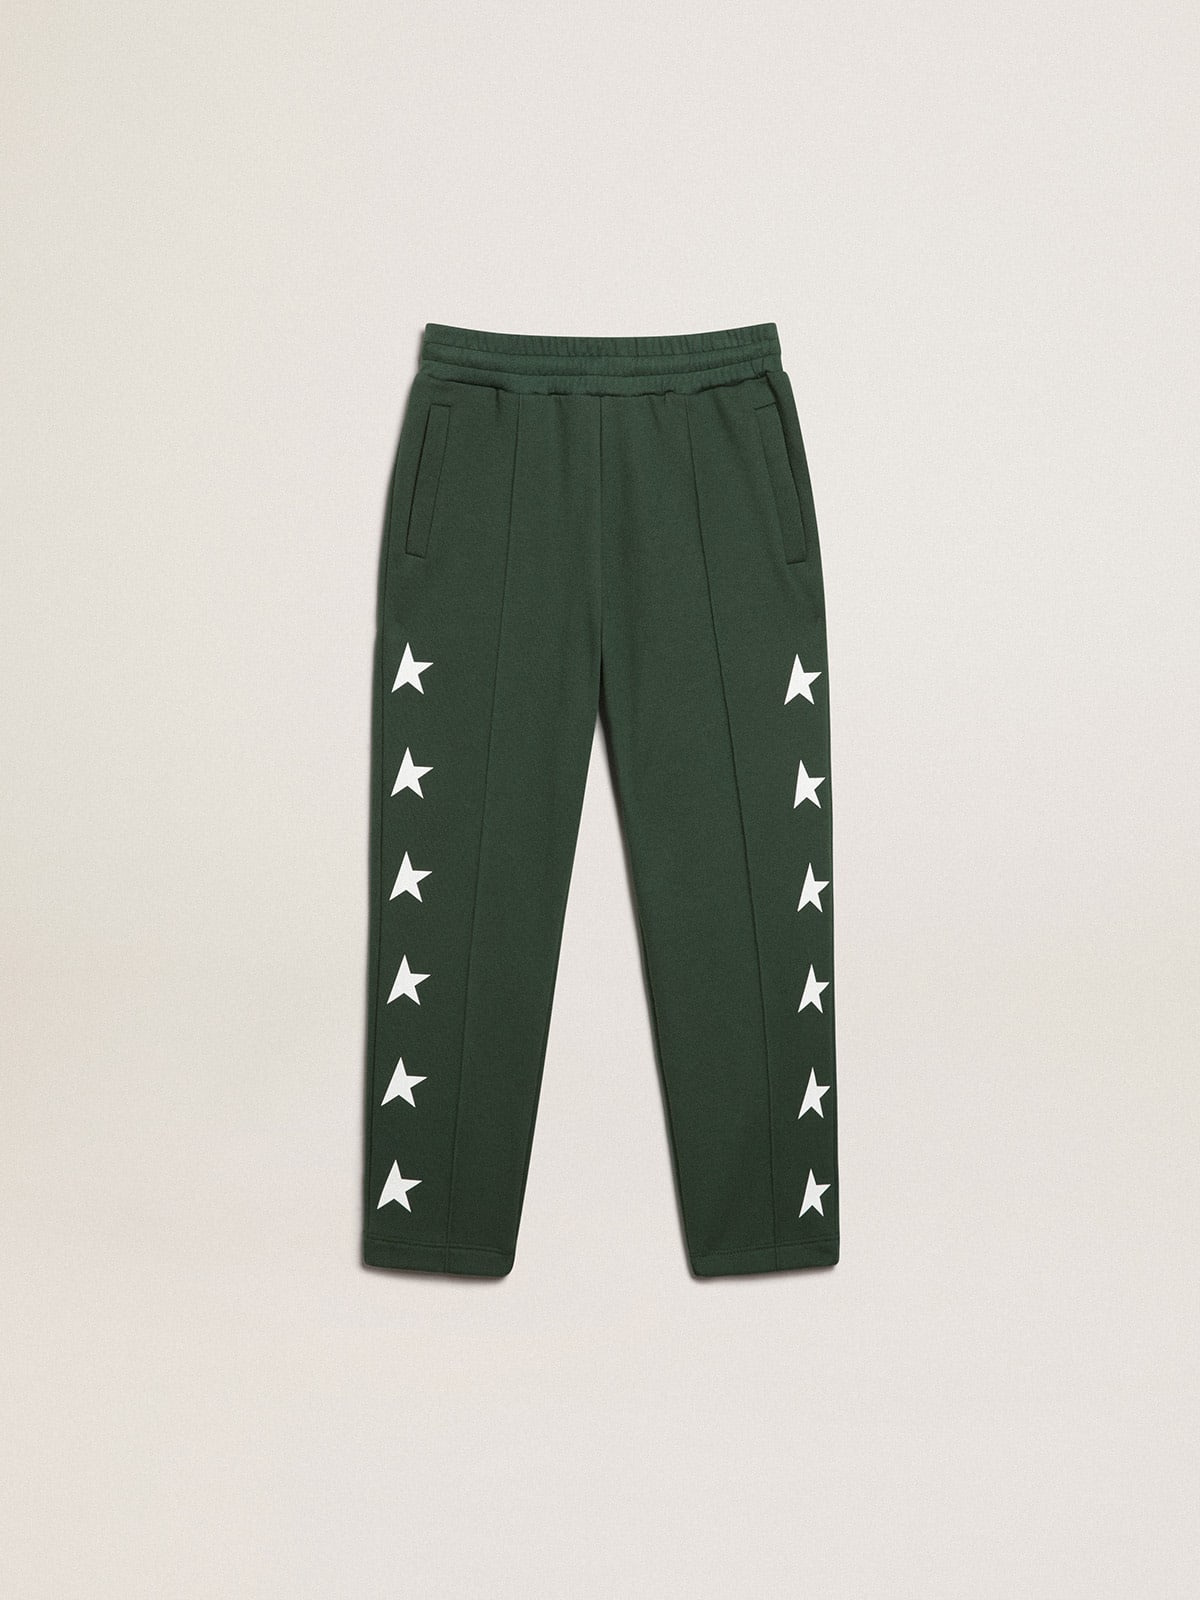 Bright-green Star Collection jogging pants with contrasting white stars